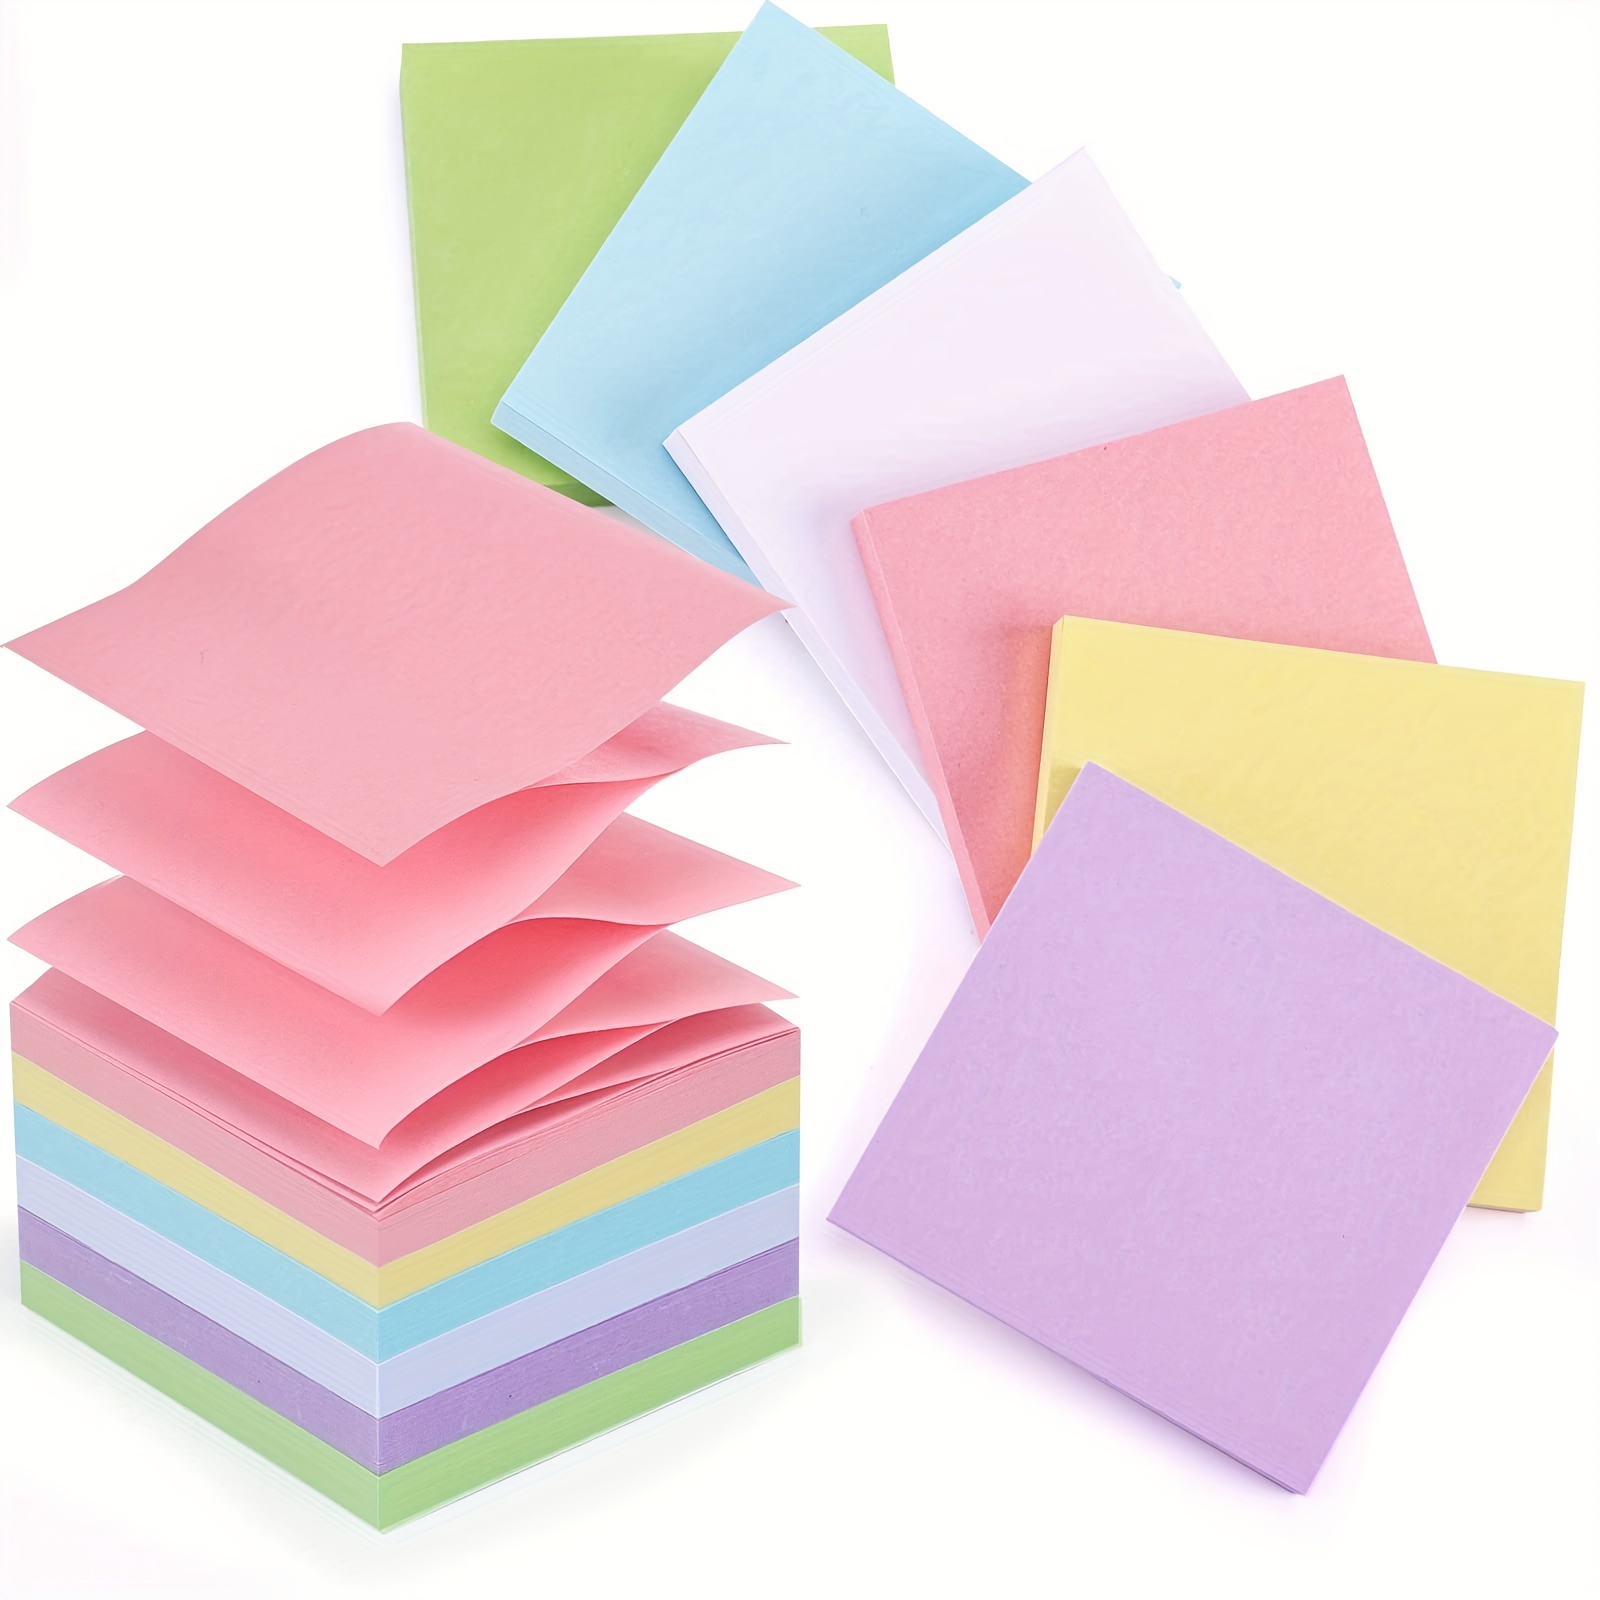 Souvenir Sticky Notes 3x3 Adhesive Notepads